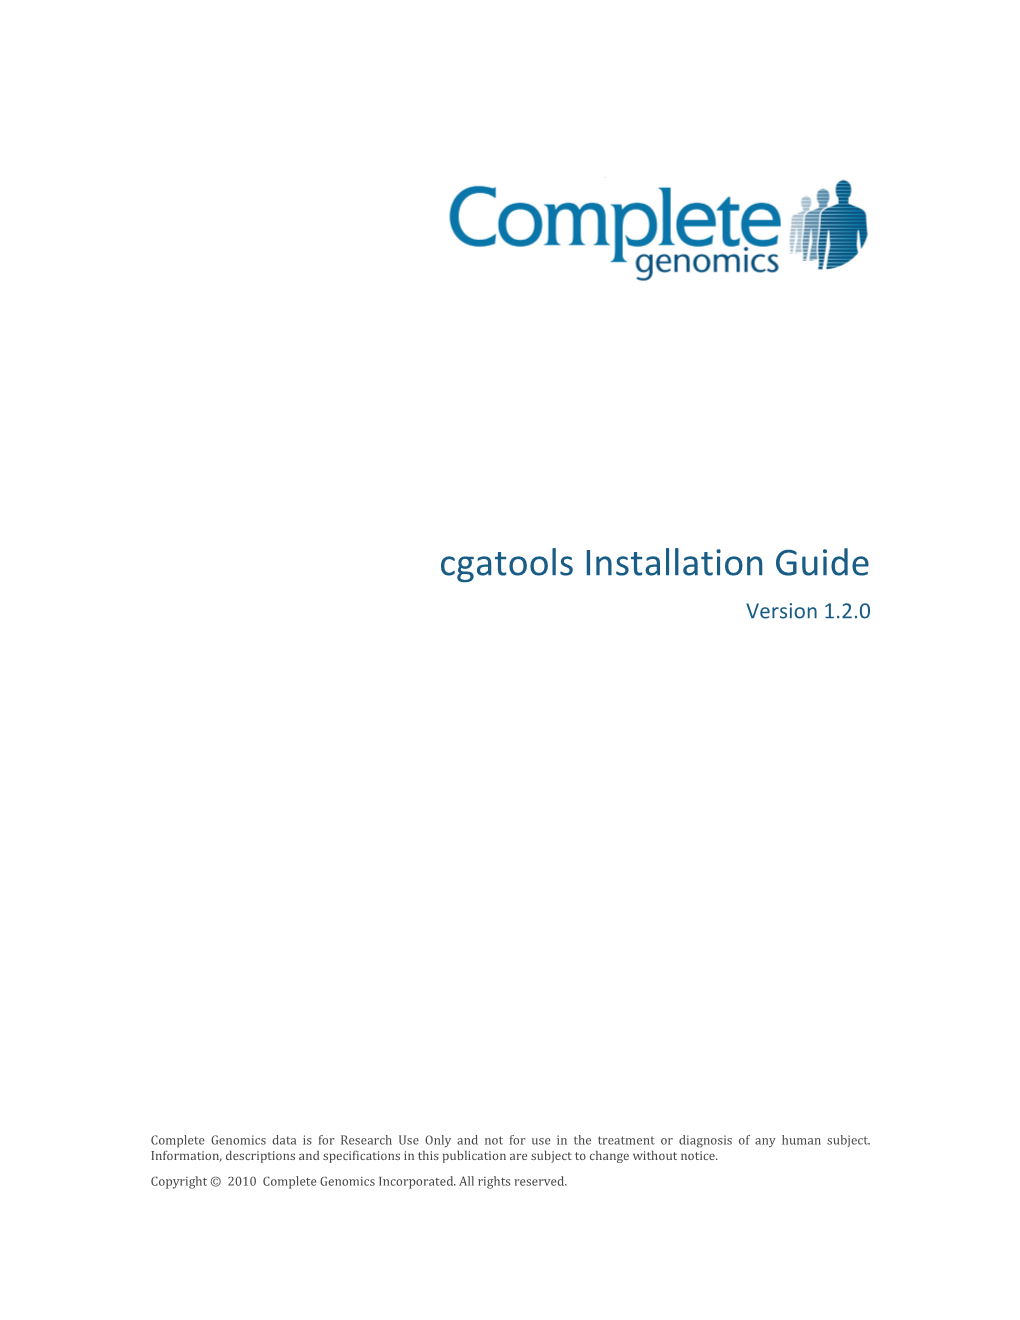 Cgatools Install Guide